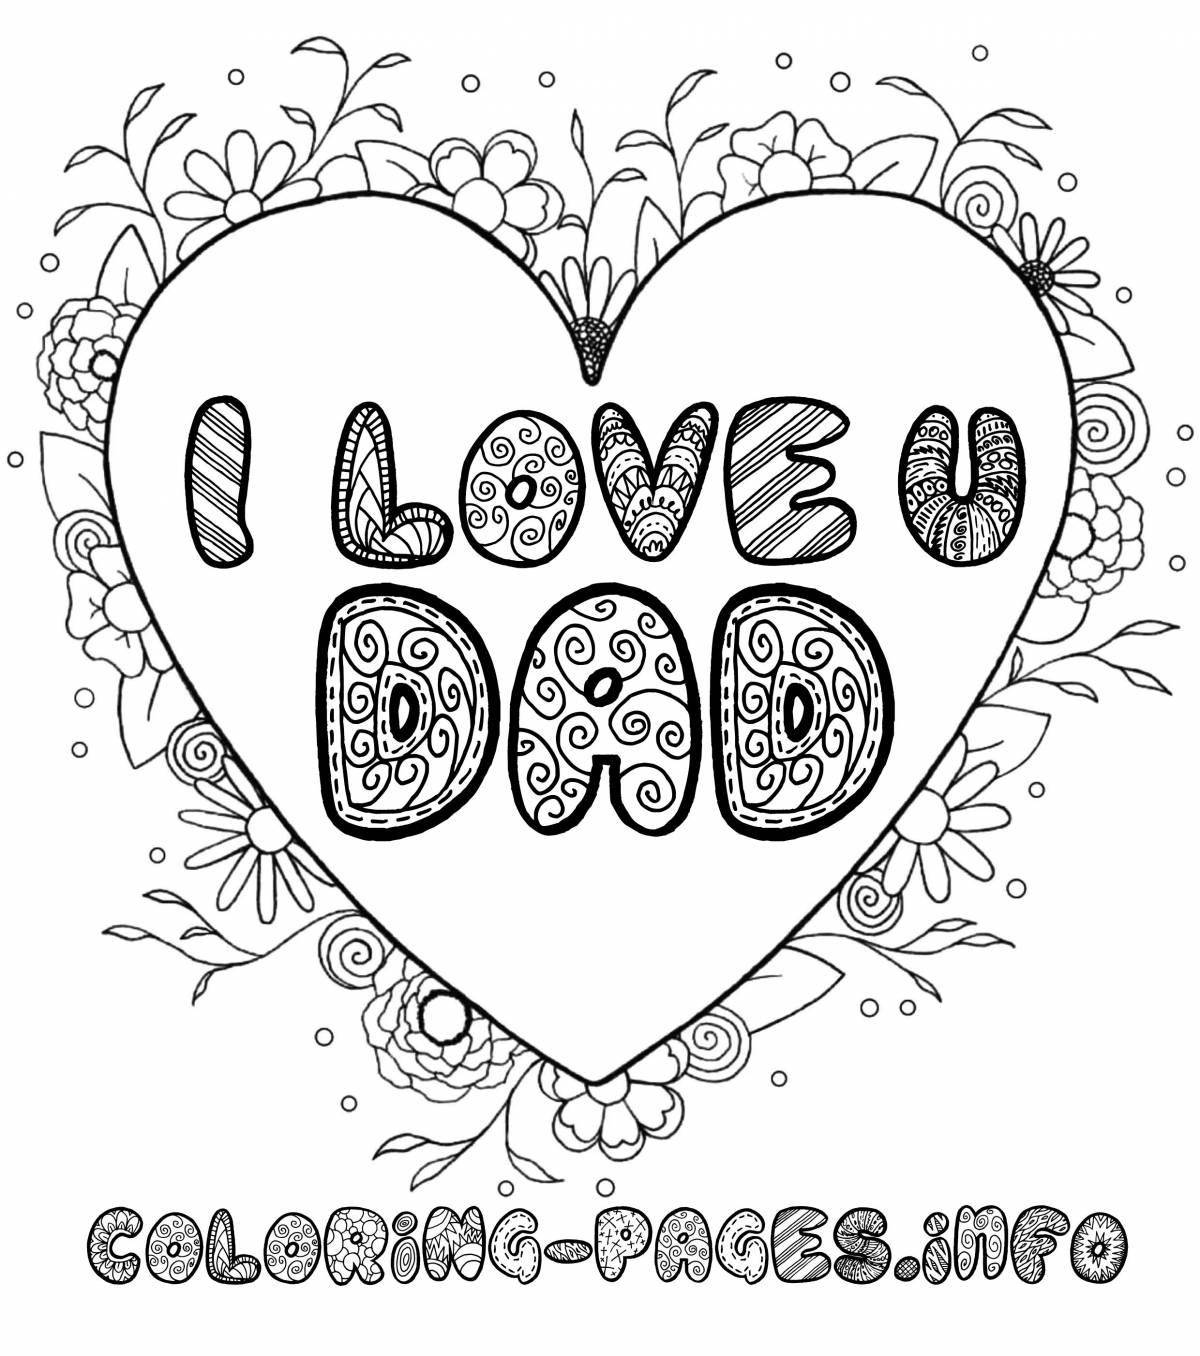 Adorable i love you dad coloring page